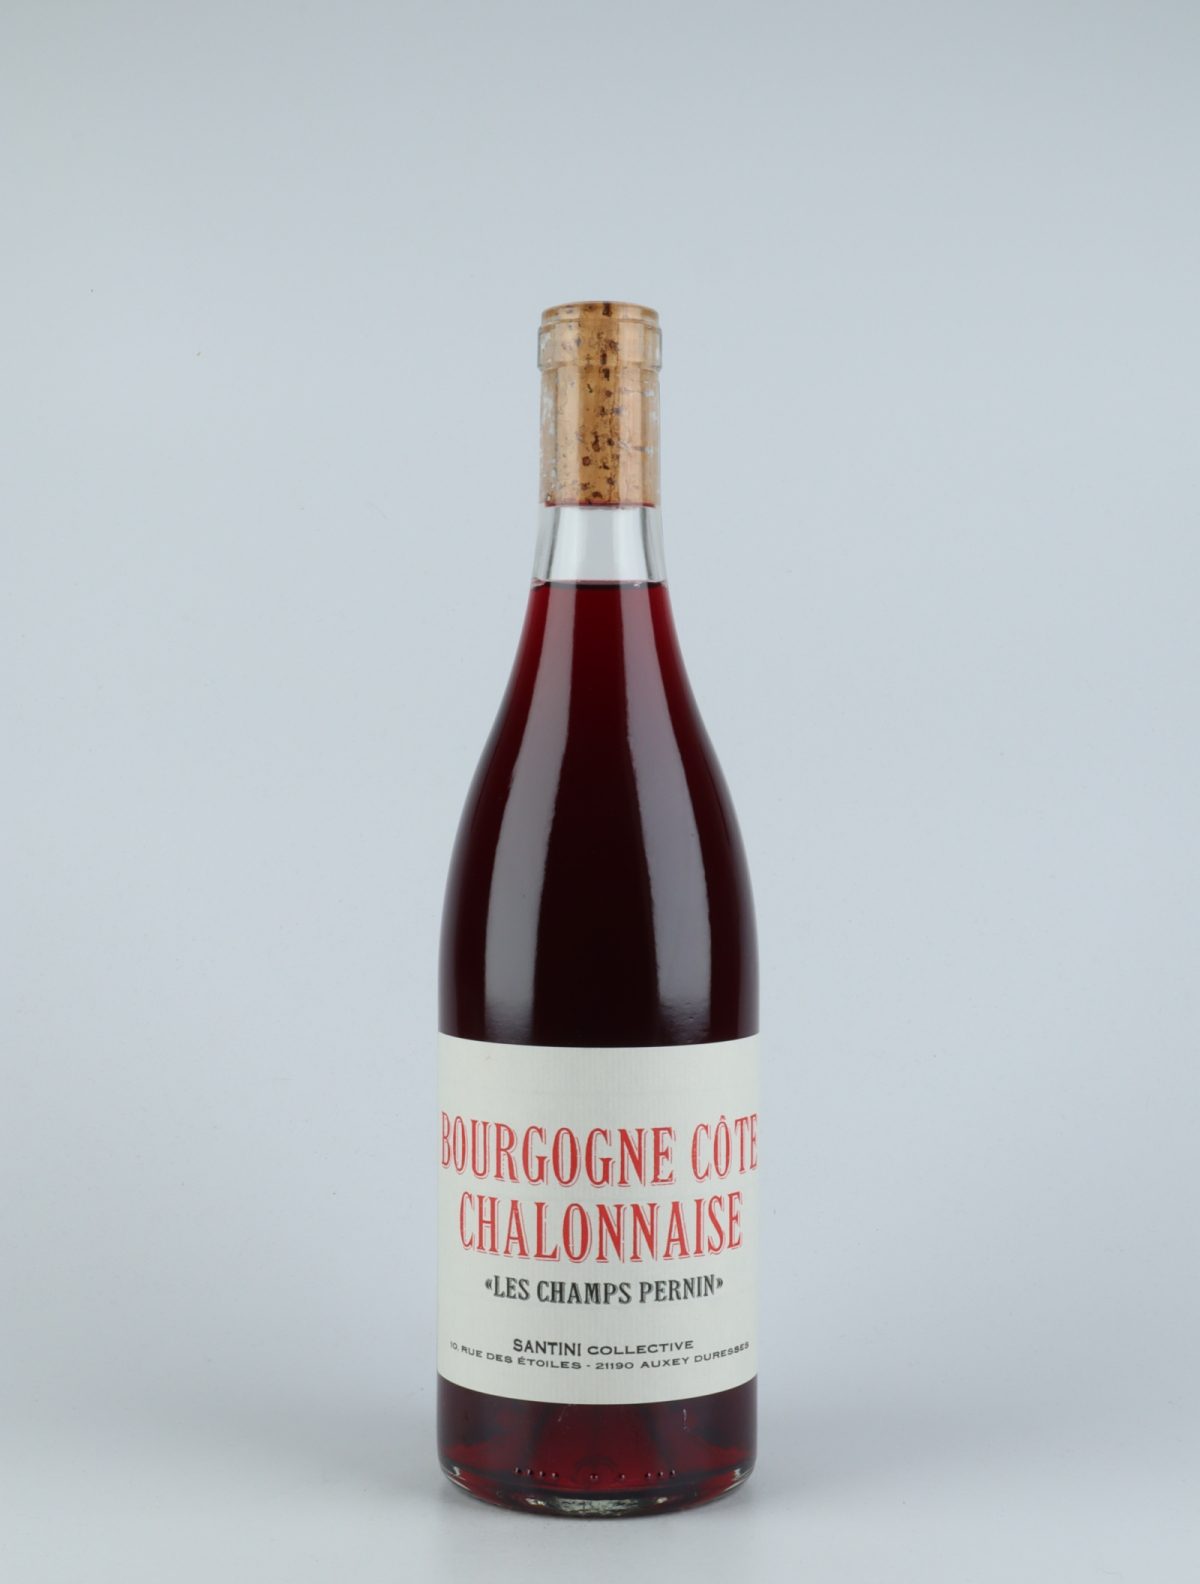 A bottle 2019 Côte Chalonnaise Rouge - Les Champs Pernin Red wine from Santini Collective, Burgundy in France